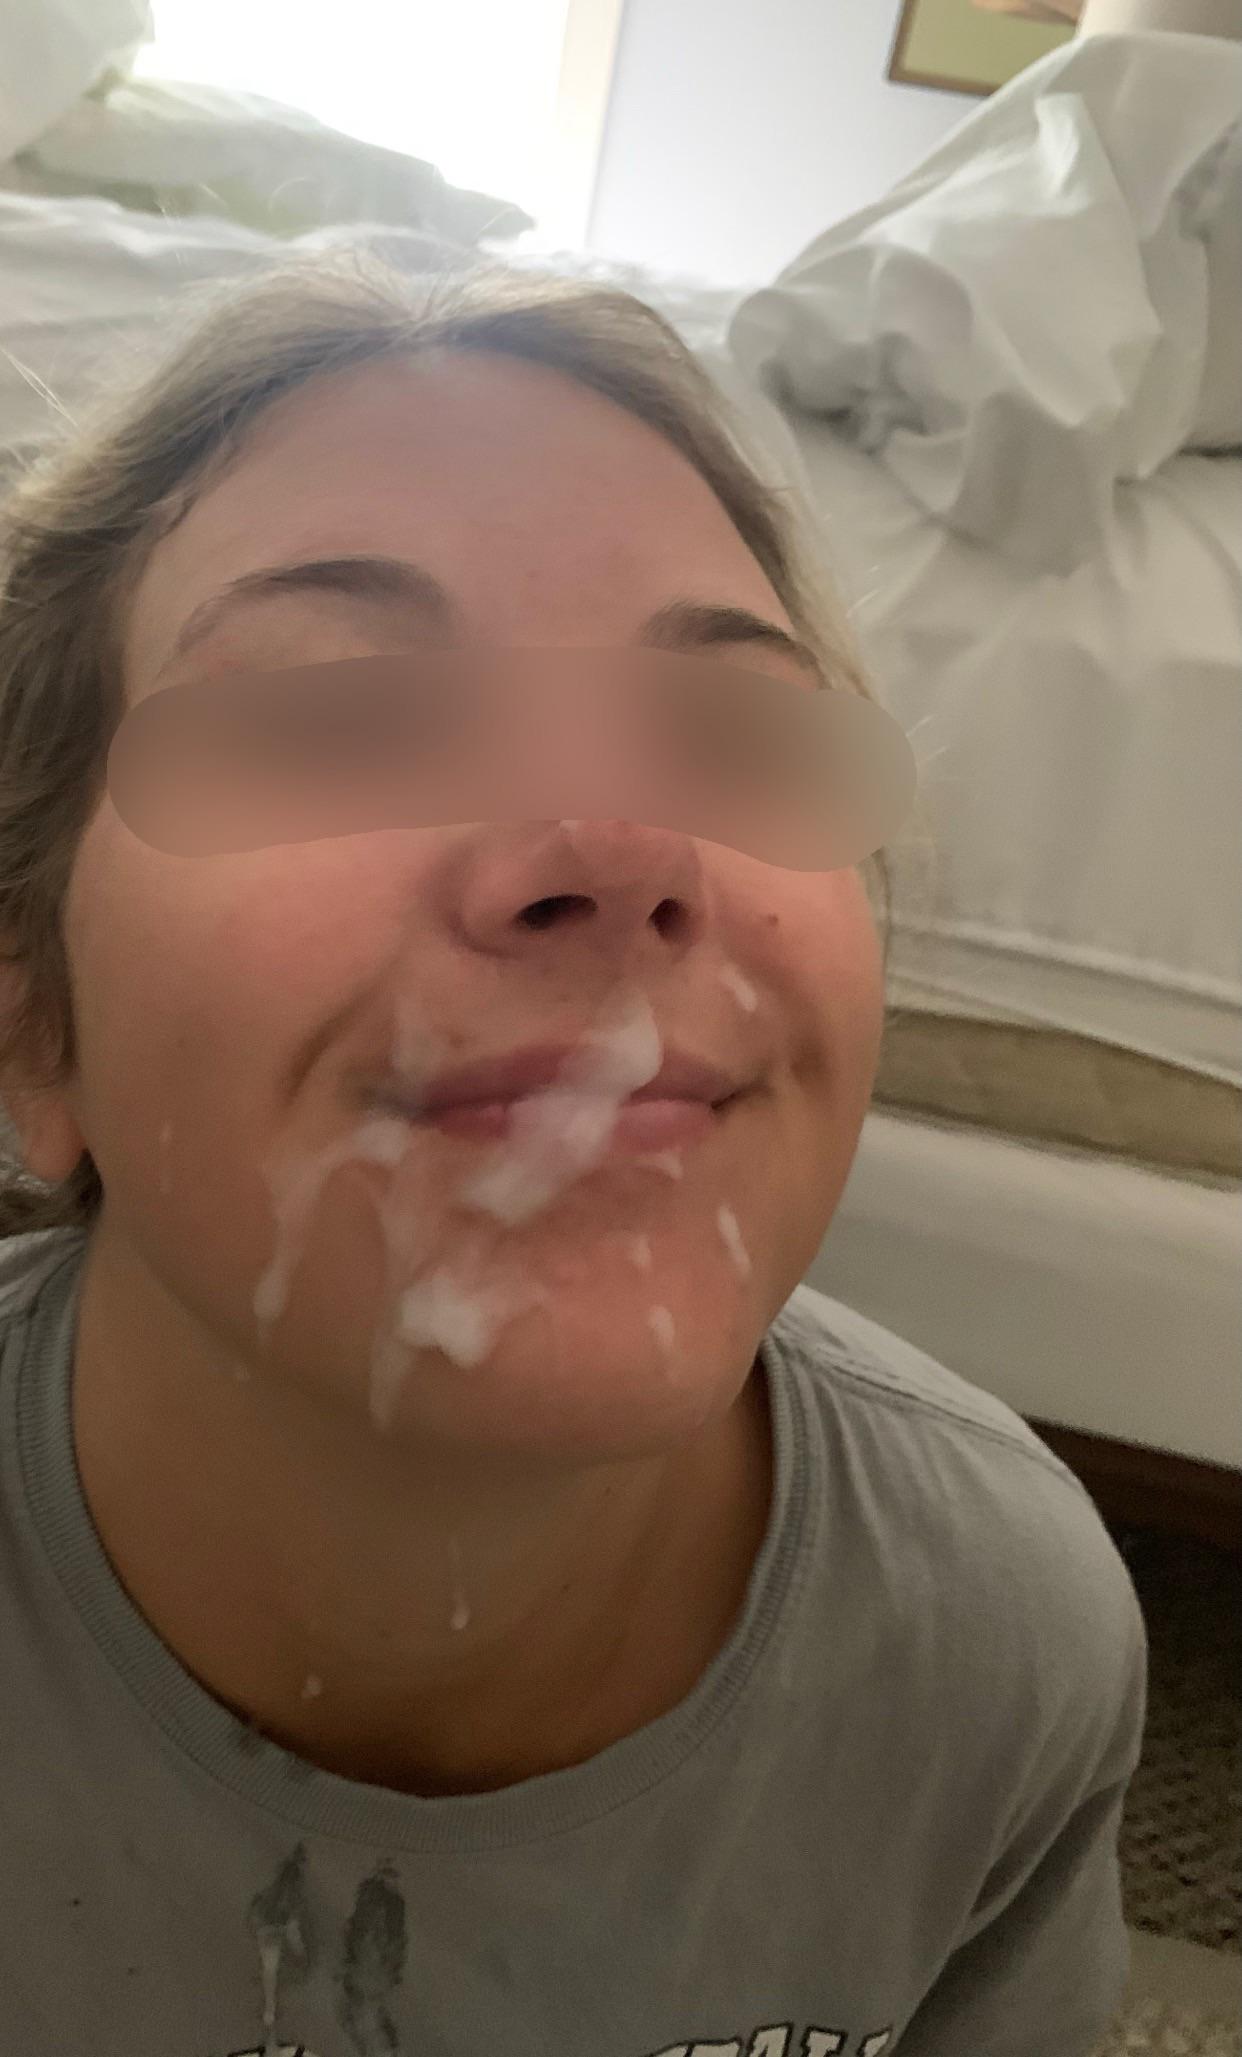 Another mans cum on my face.